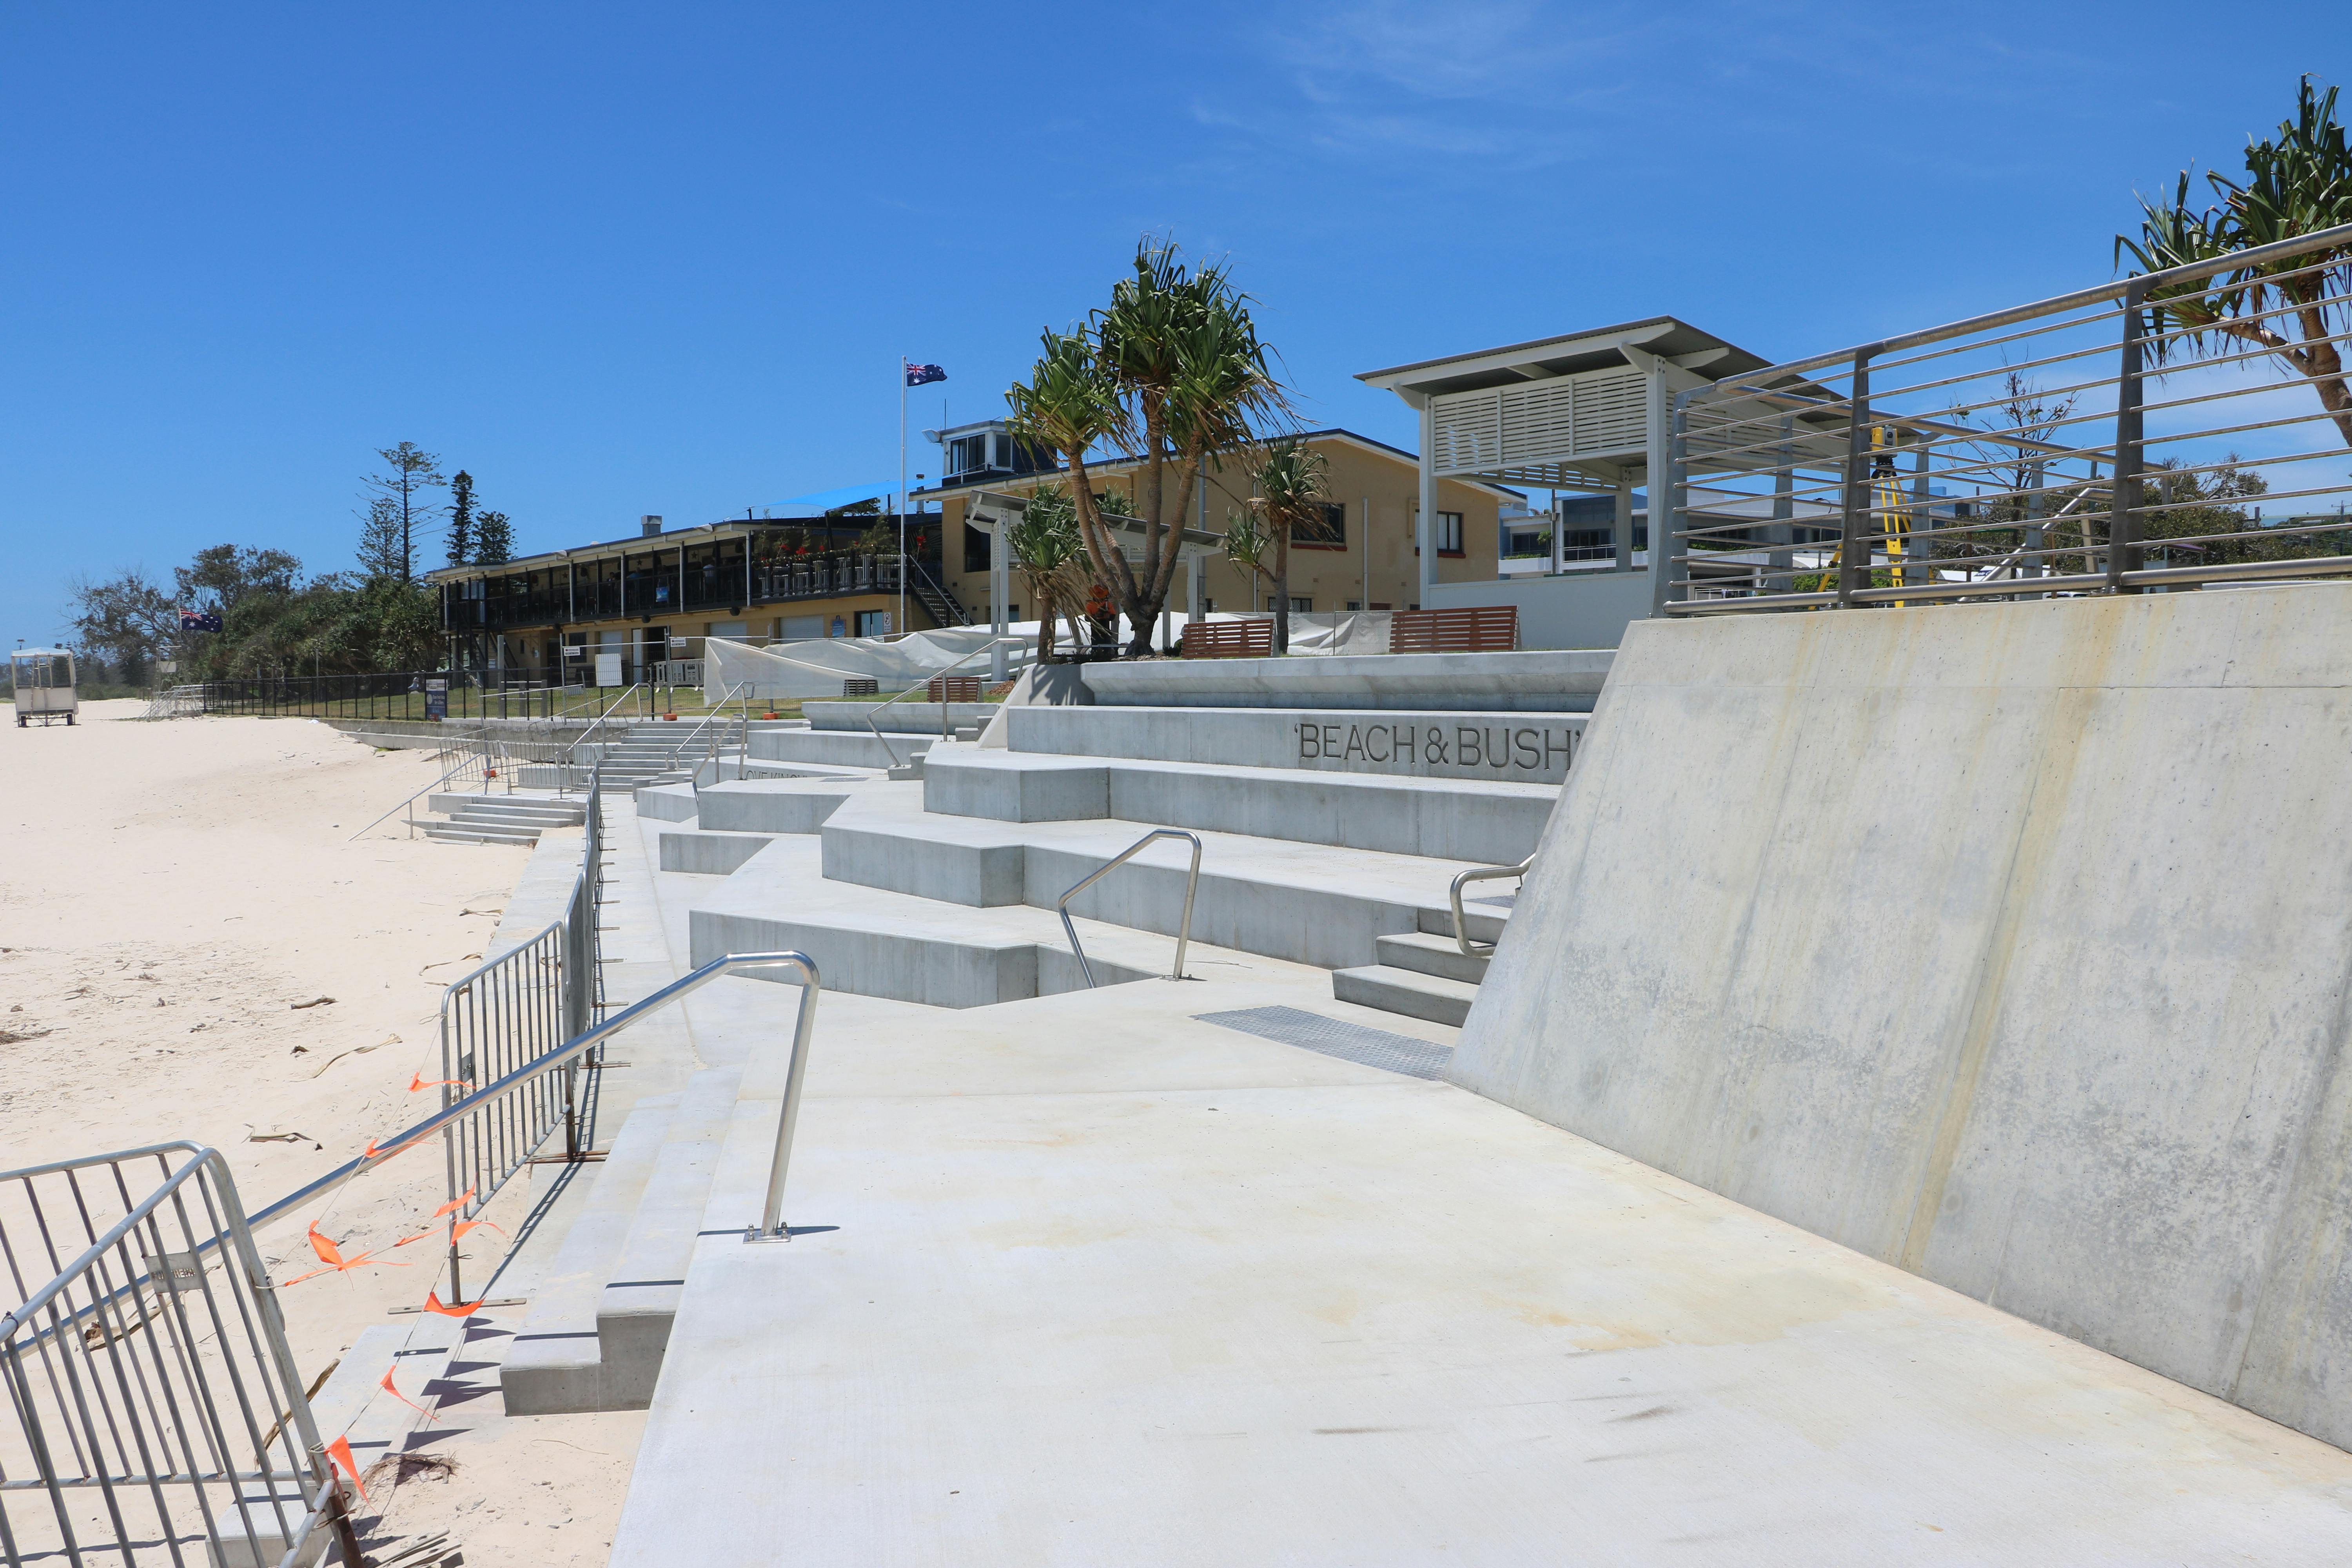 The new beach access stairs